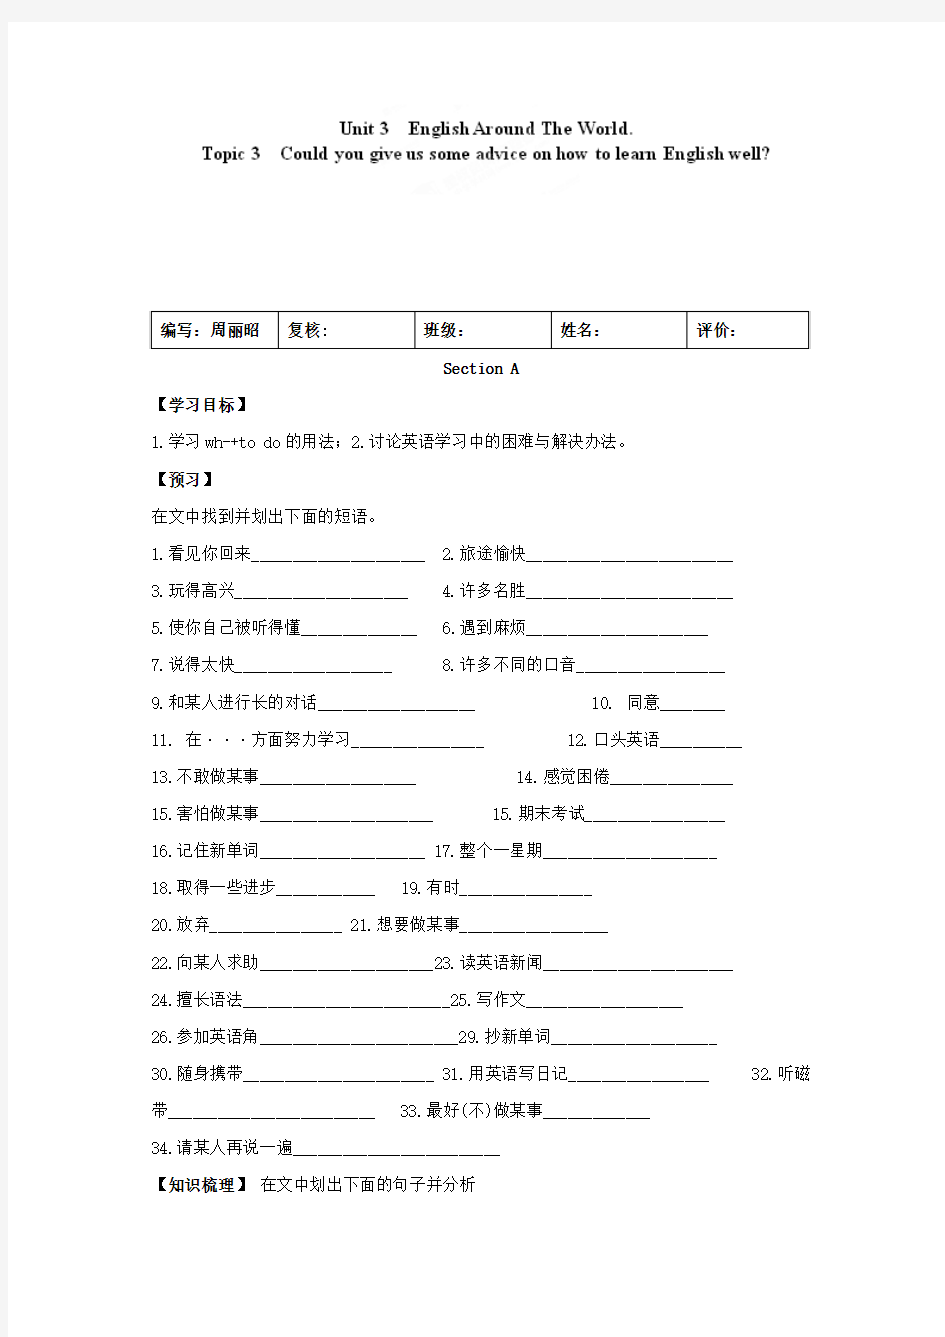 Unit3 Topic 3 Could you give us some advice on how to learn English well 学案8(仁爱版九年级上)